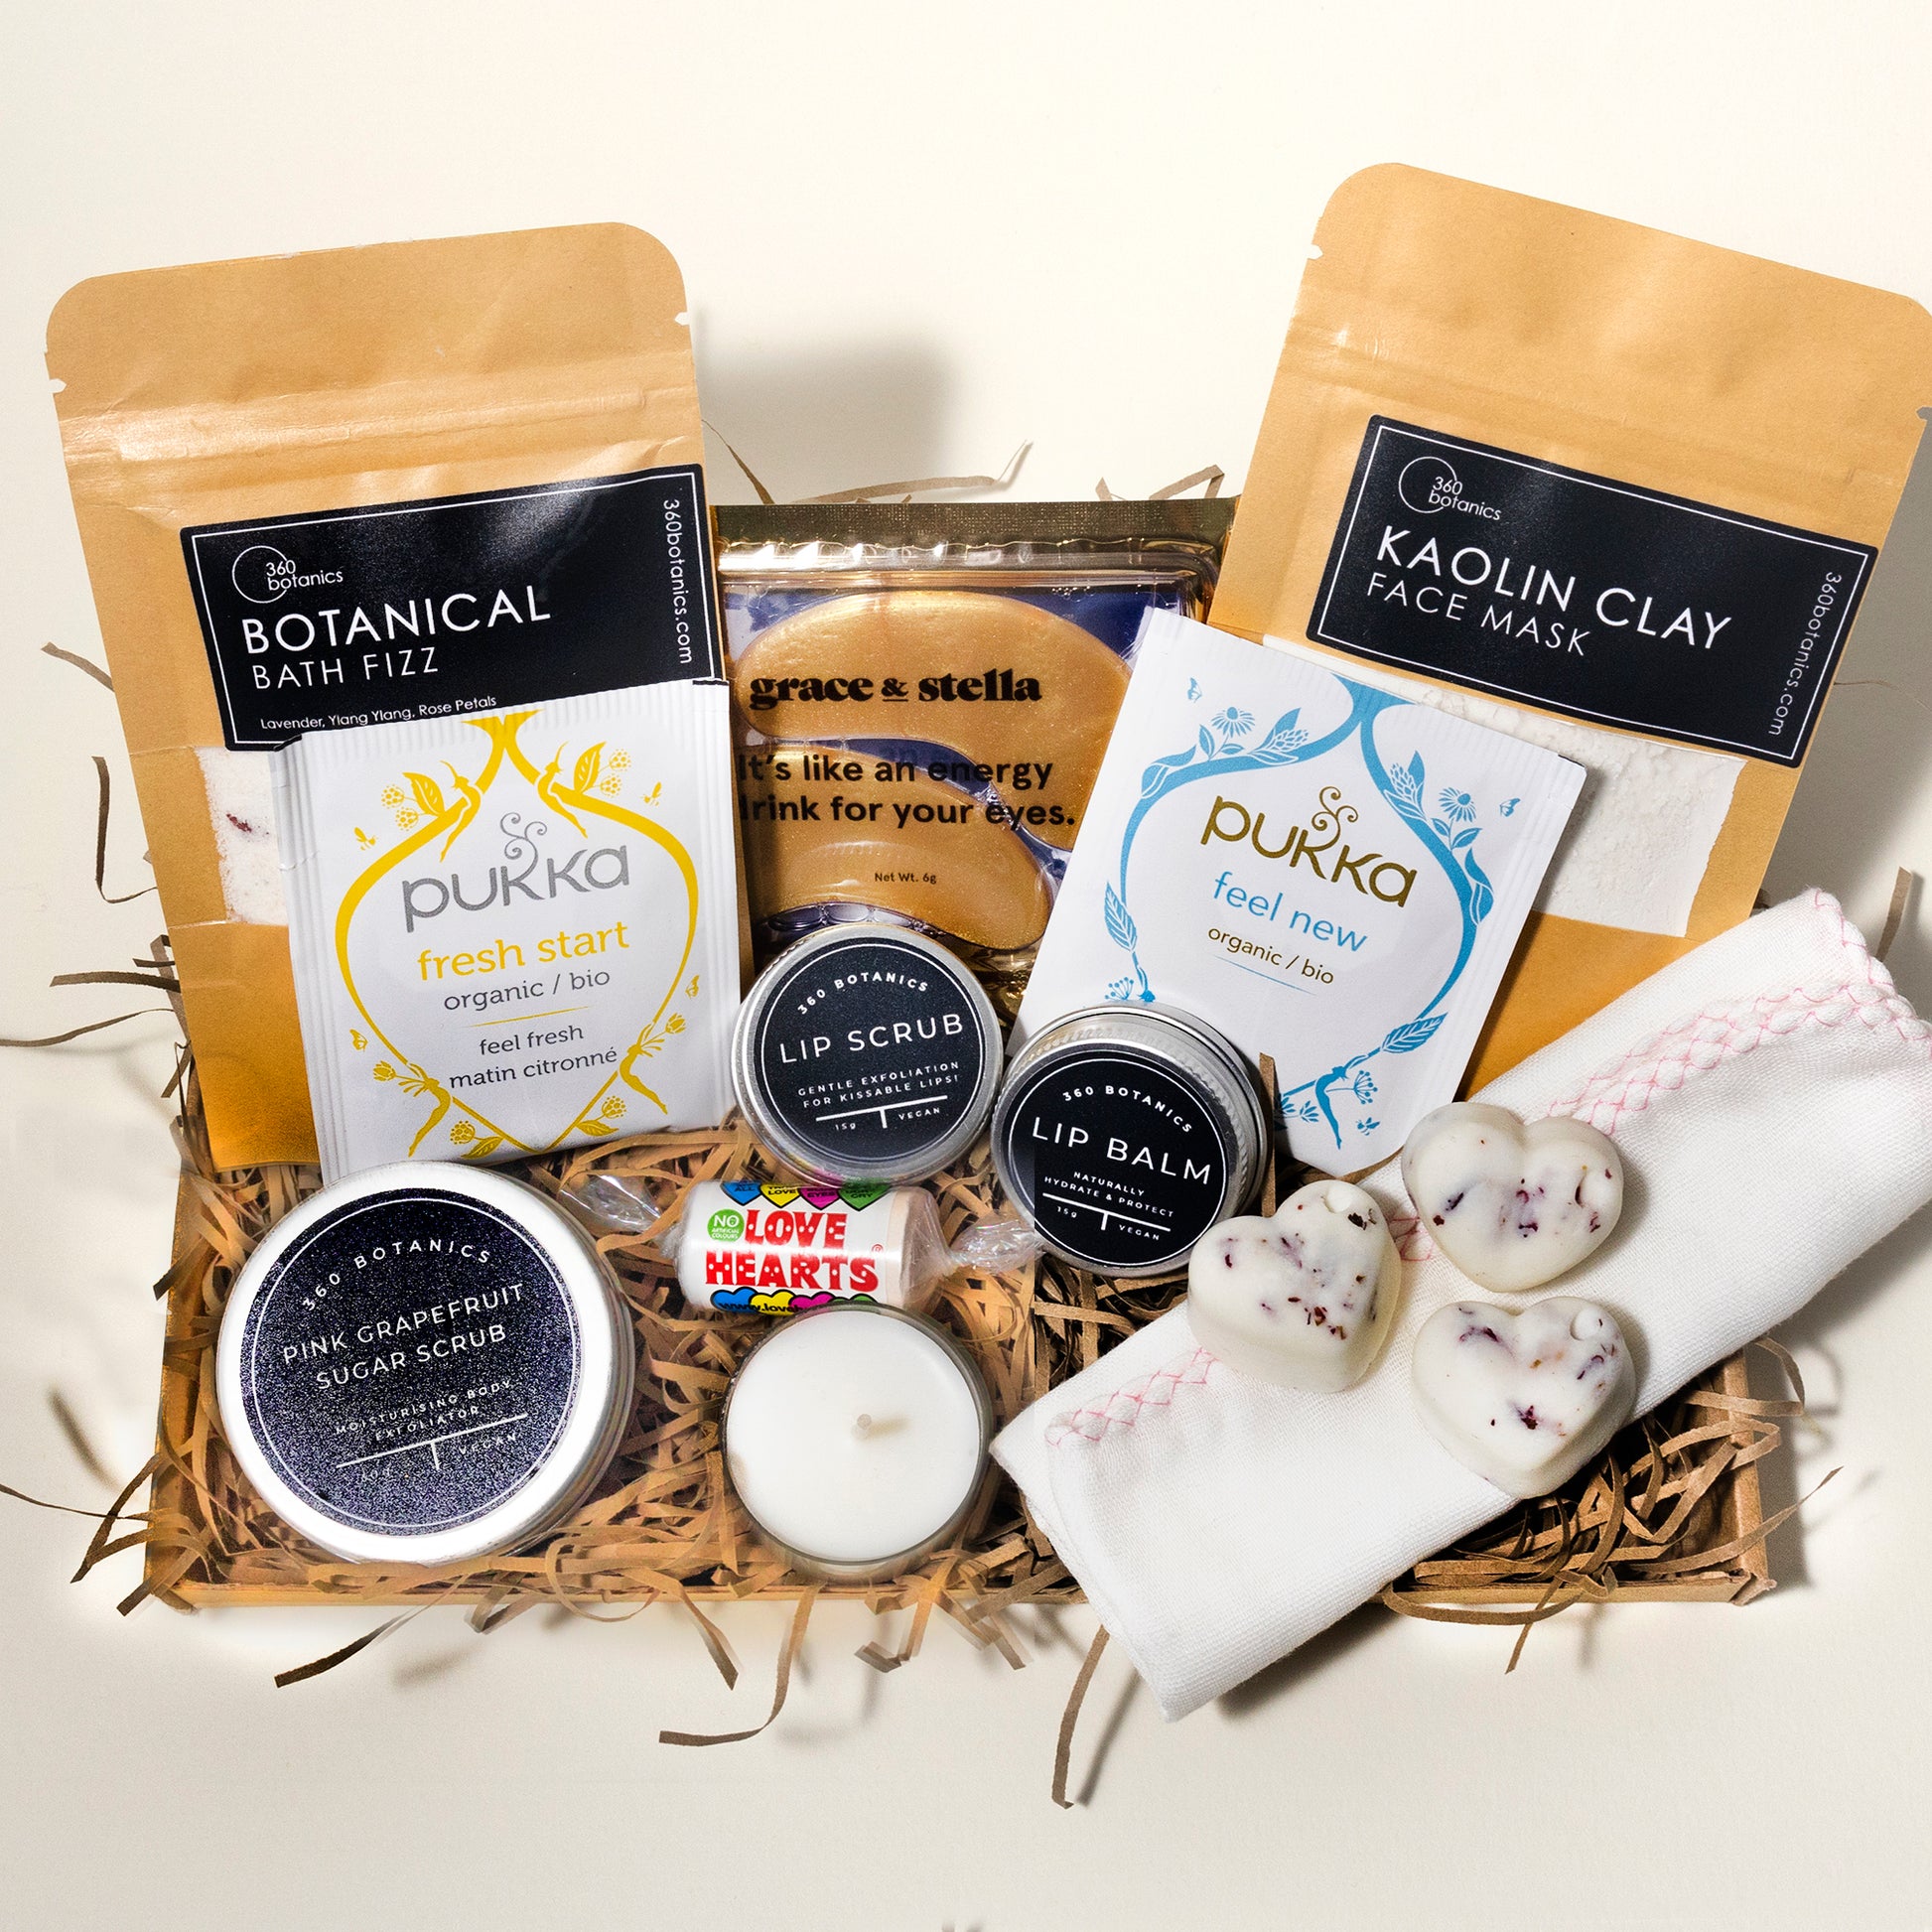 A gift basket containing a variety of self-care products including "Botanical Bath Fizz," "Kaolin Clay Face Mask," herbal teas from Pukka, "Grace & Stella" eye masks, lip scrub and balm, a pink grapefruit sugar scrub, a candle, a face cloth, and heart-shaped bath bombs, all nestled on a bed of shredded cardboard